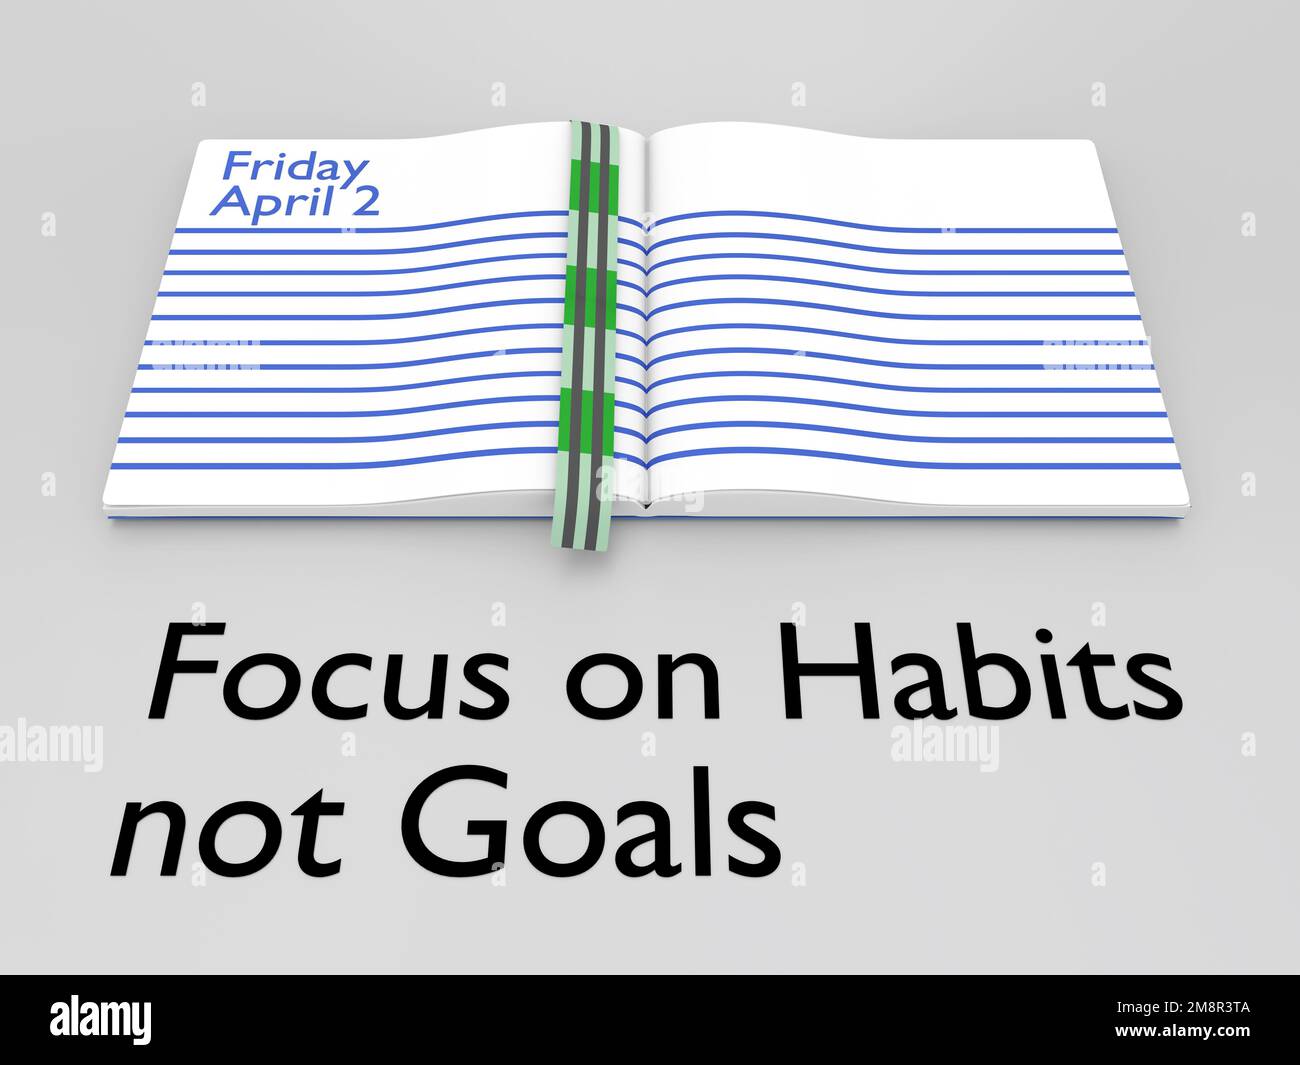 3D illustration of Focus on Habits not Goals script under an appointment calendar, isolated over gray. Stock Photo